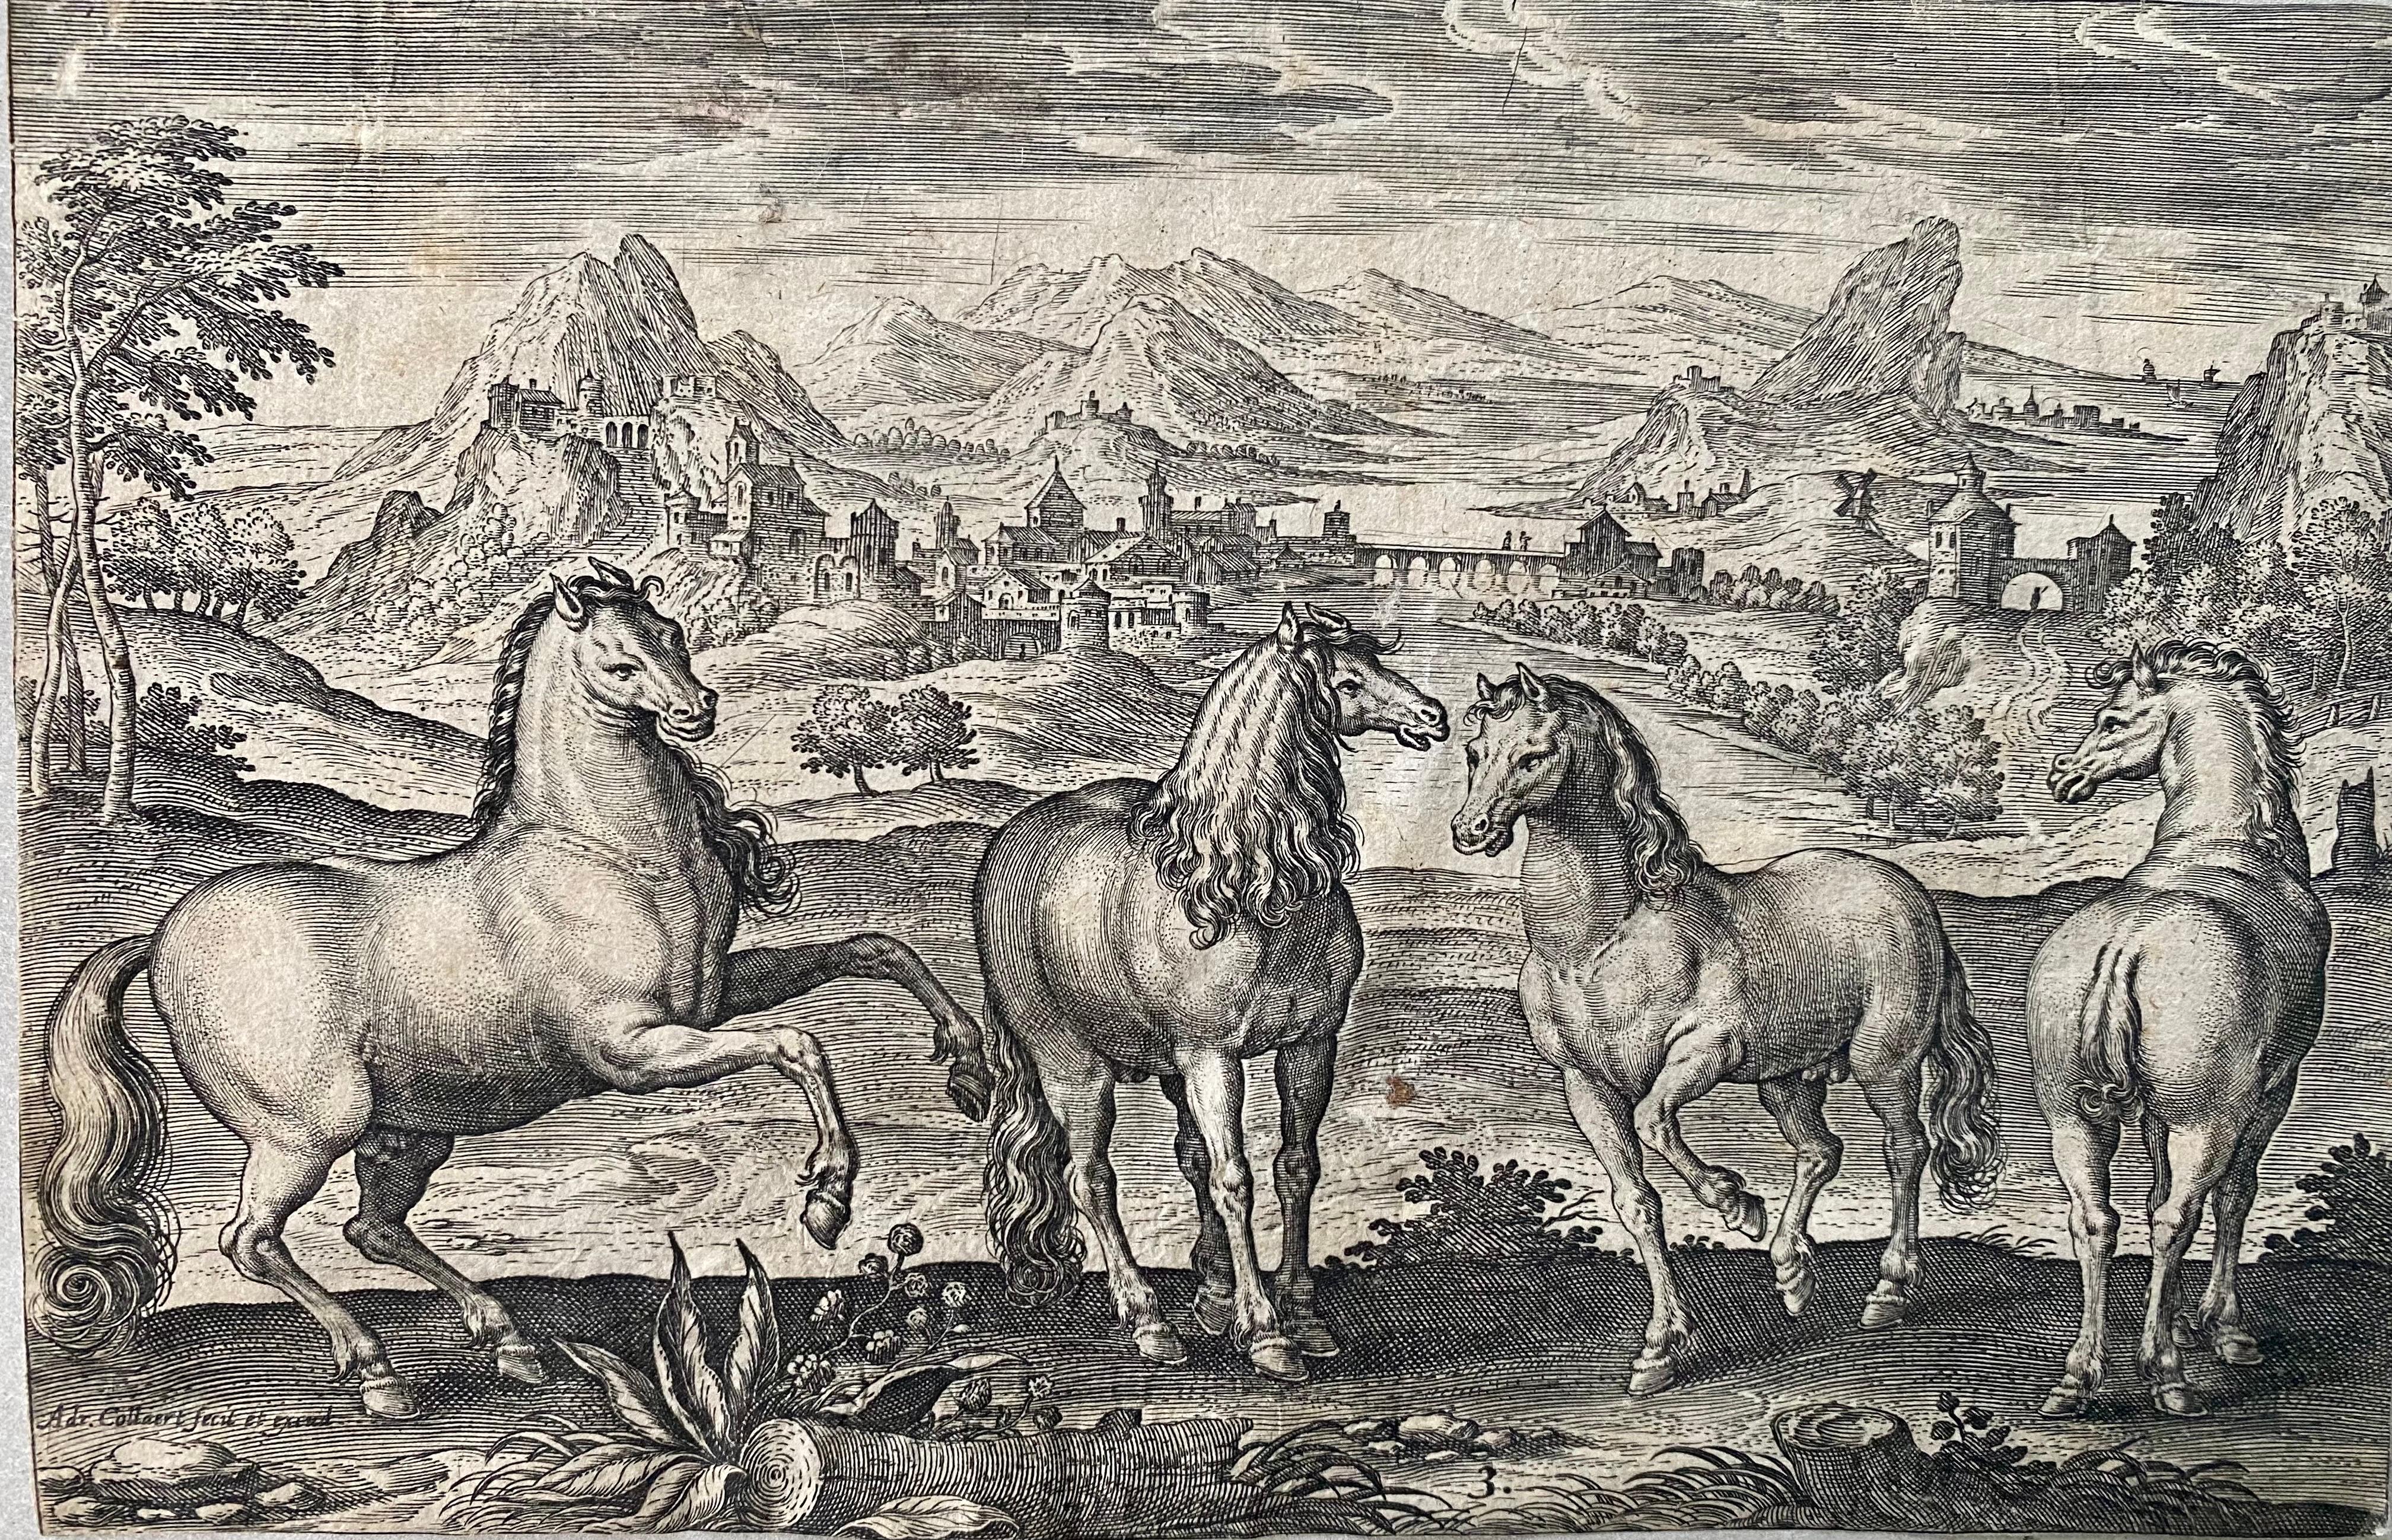 Adriaen Collaert Landscape Print - 17th century flemish engraving of horses in front of a landscape - Horse Animal